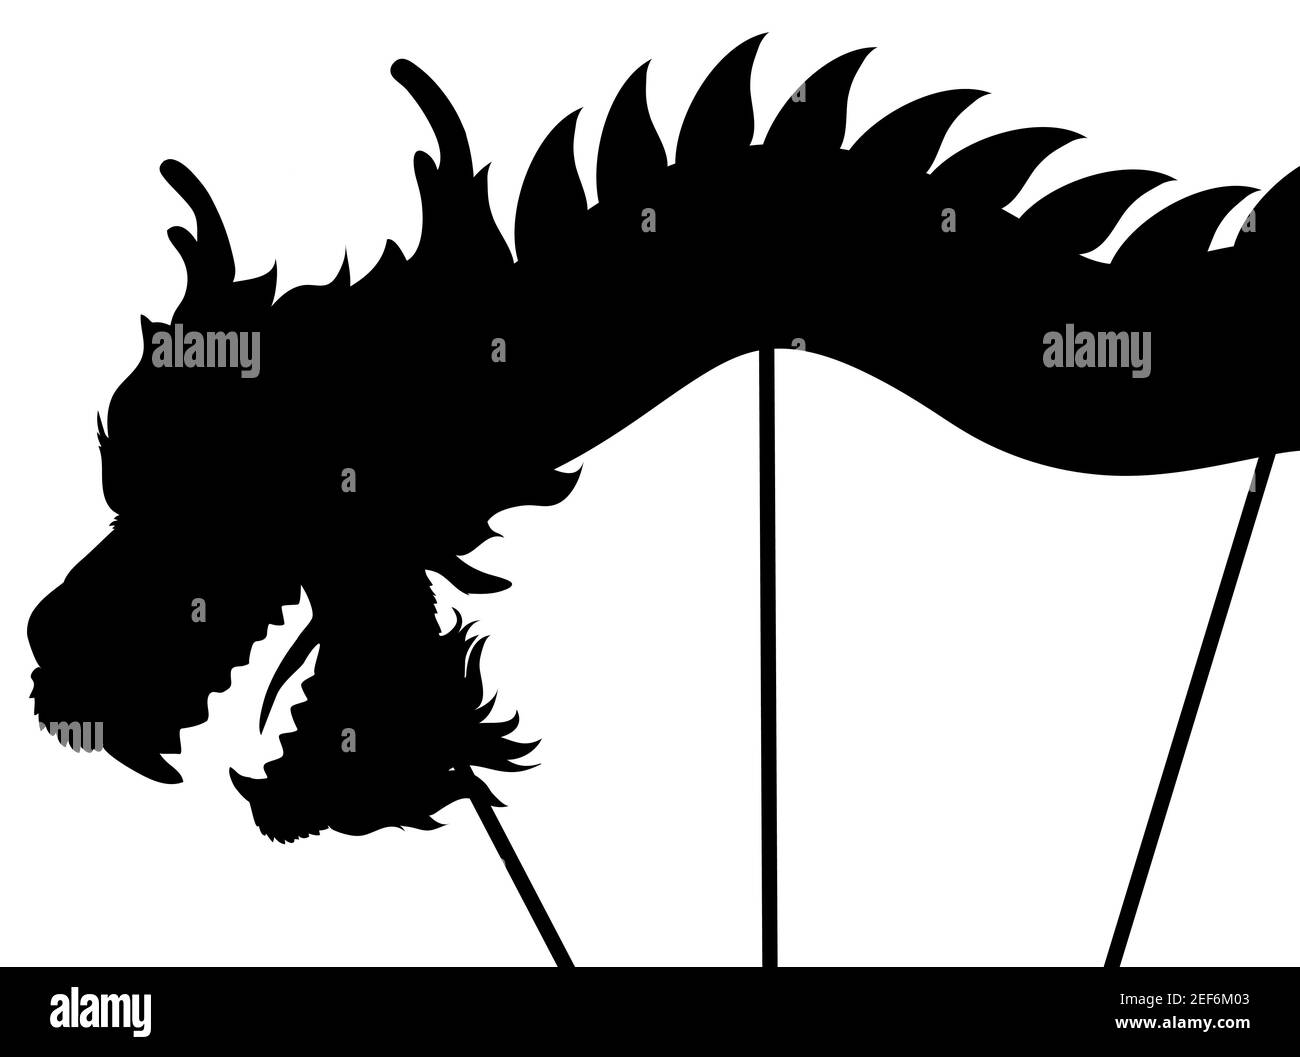 Silhouette of Chinese dragon costume over poles performing its traditional dance, isolated over white background. Stock Vector